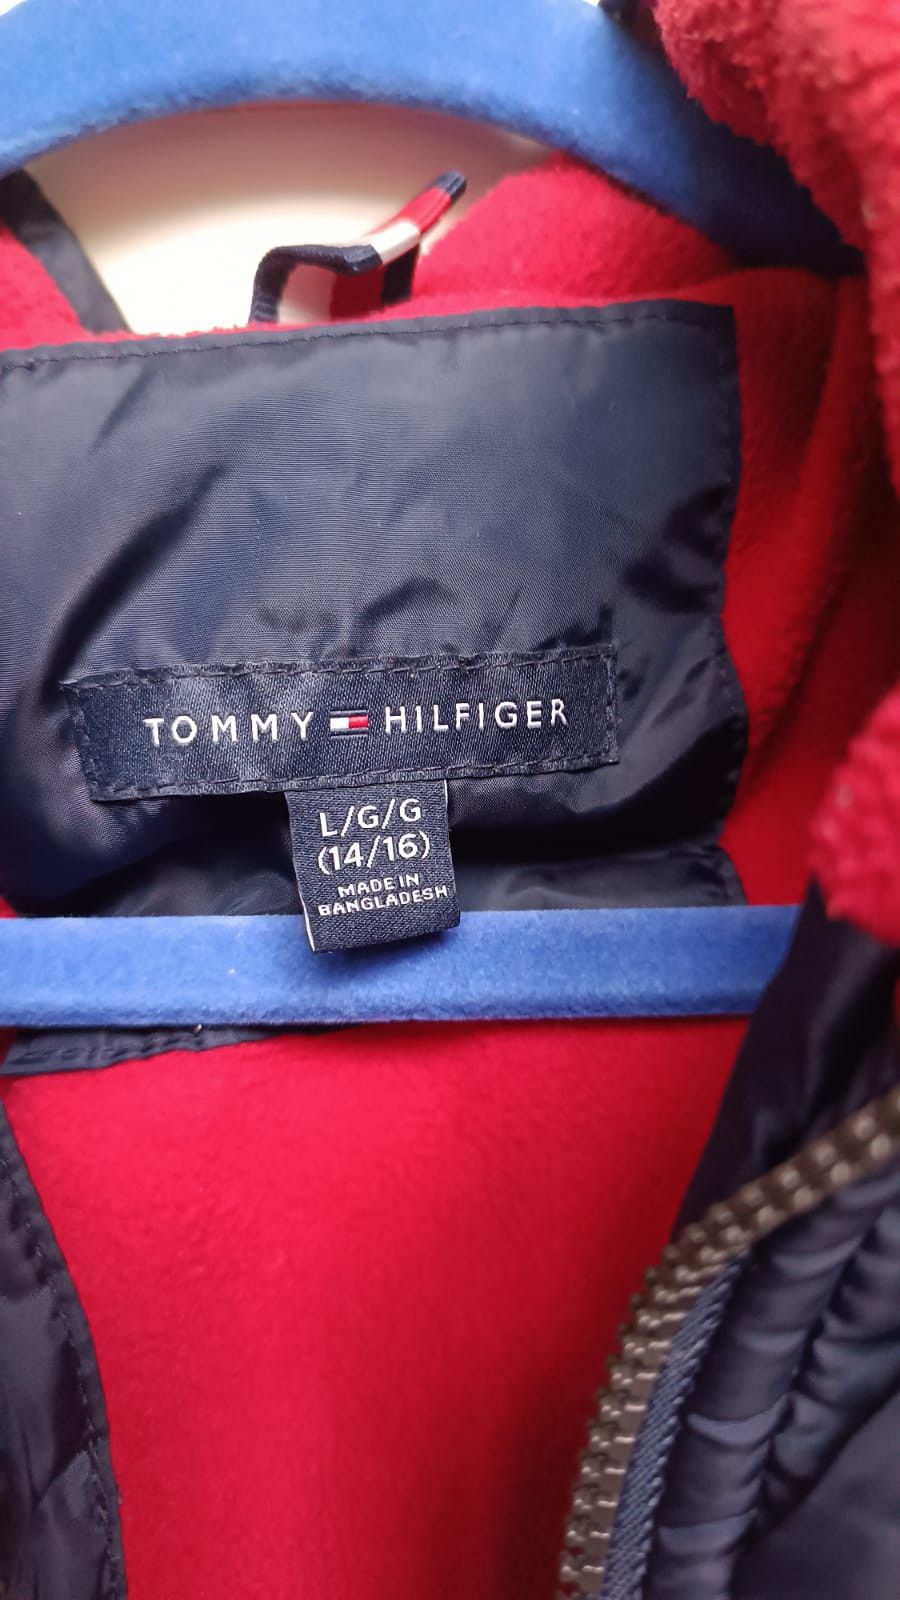 Youth JACKET _ Tommy HILFIGER _ For YOUTH 12 TO 14 AGE